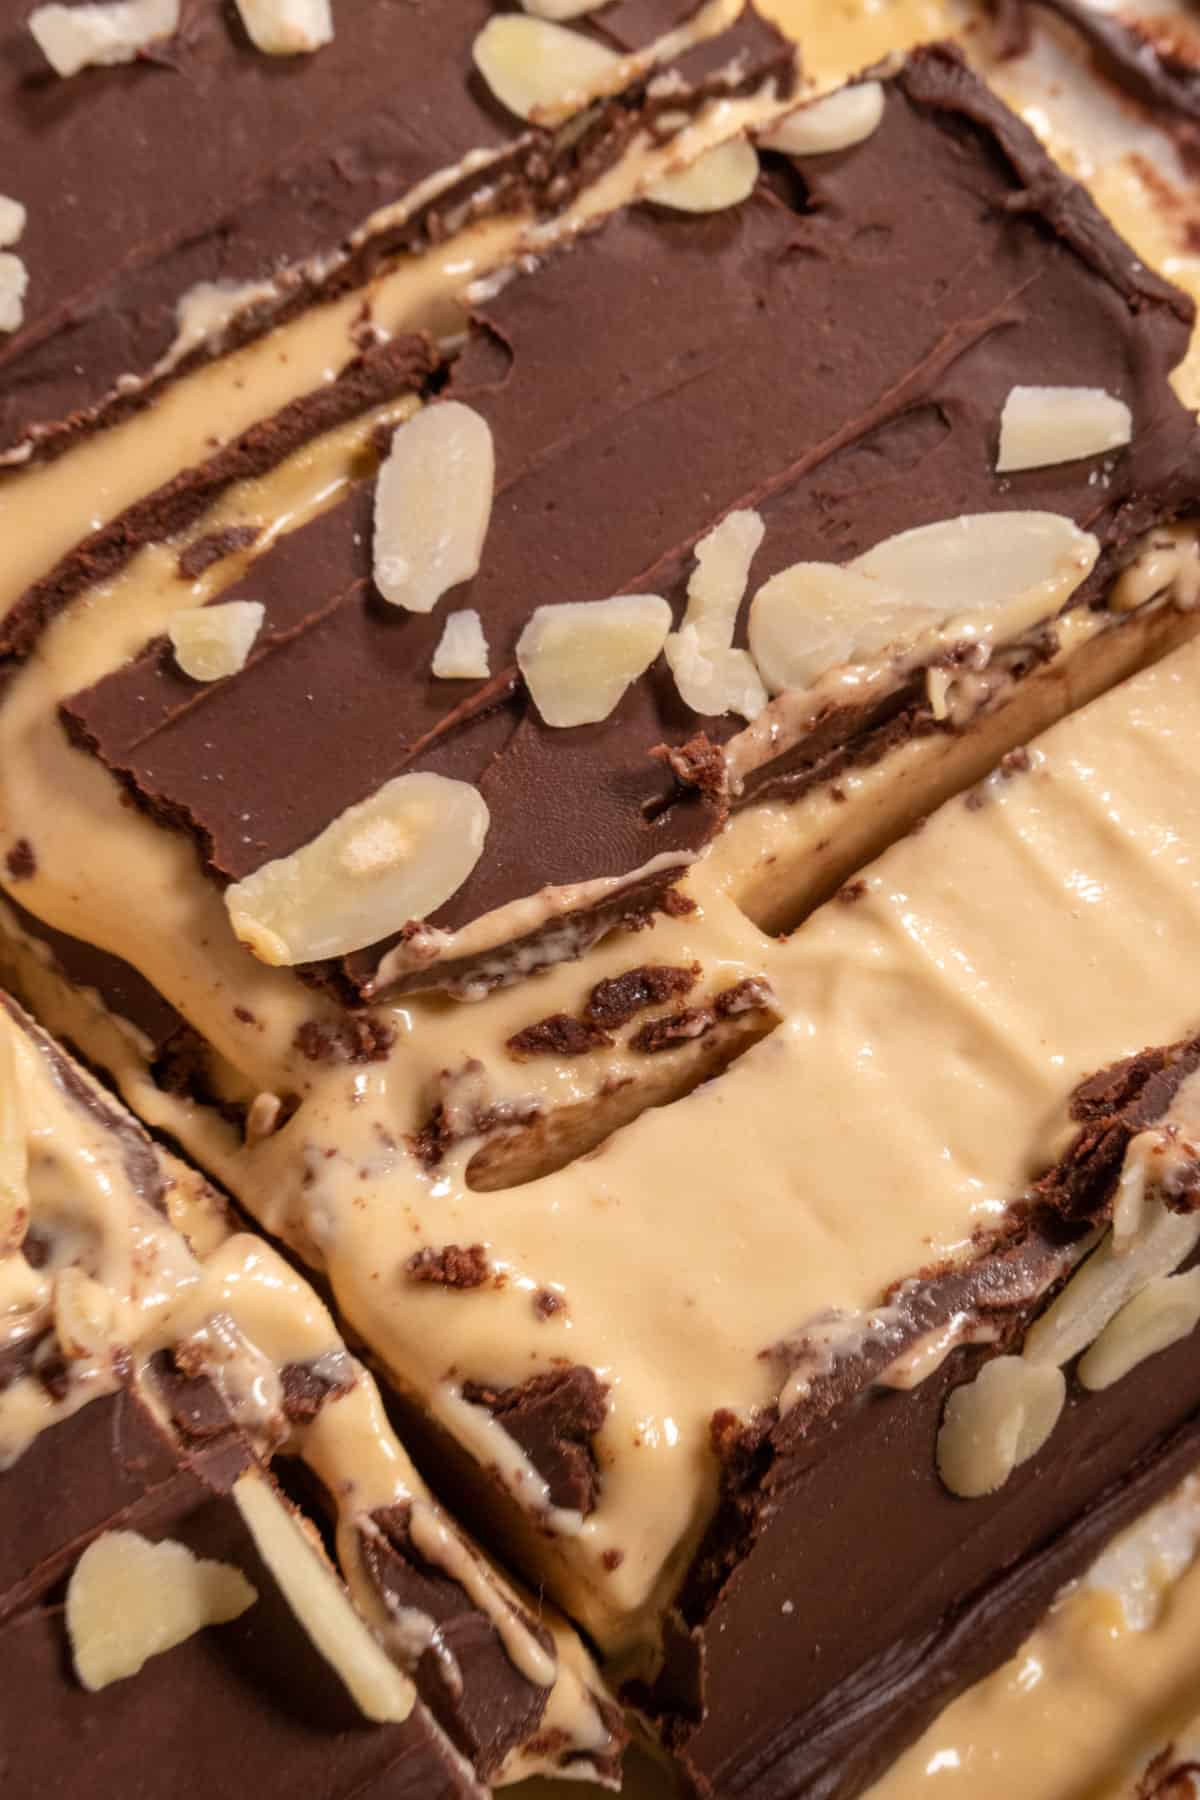 An aerial image showing several of my vegan nanaimo bar slices. The chocolate has broken on some of them.